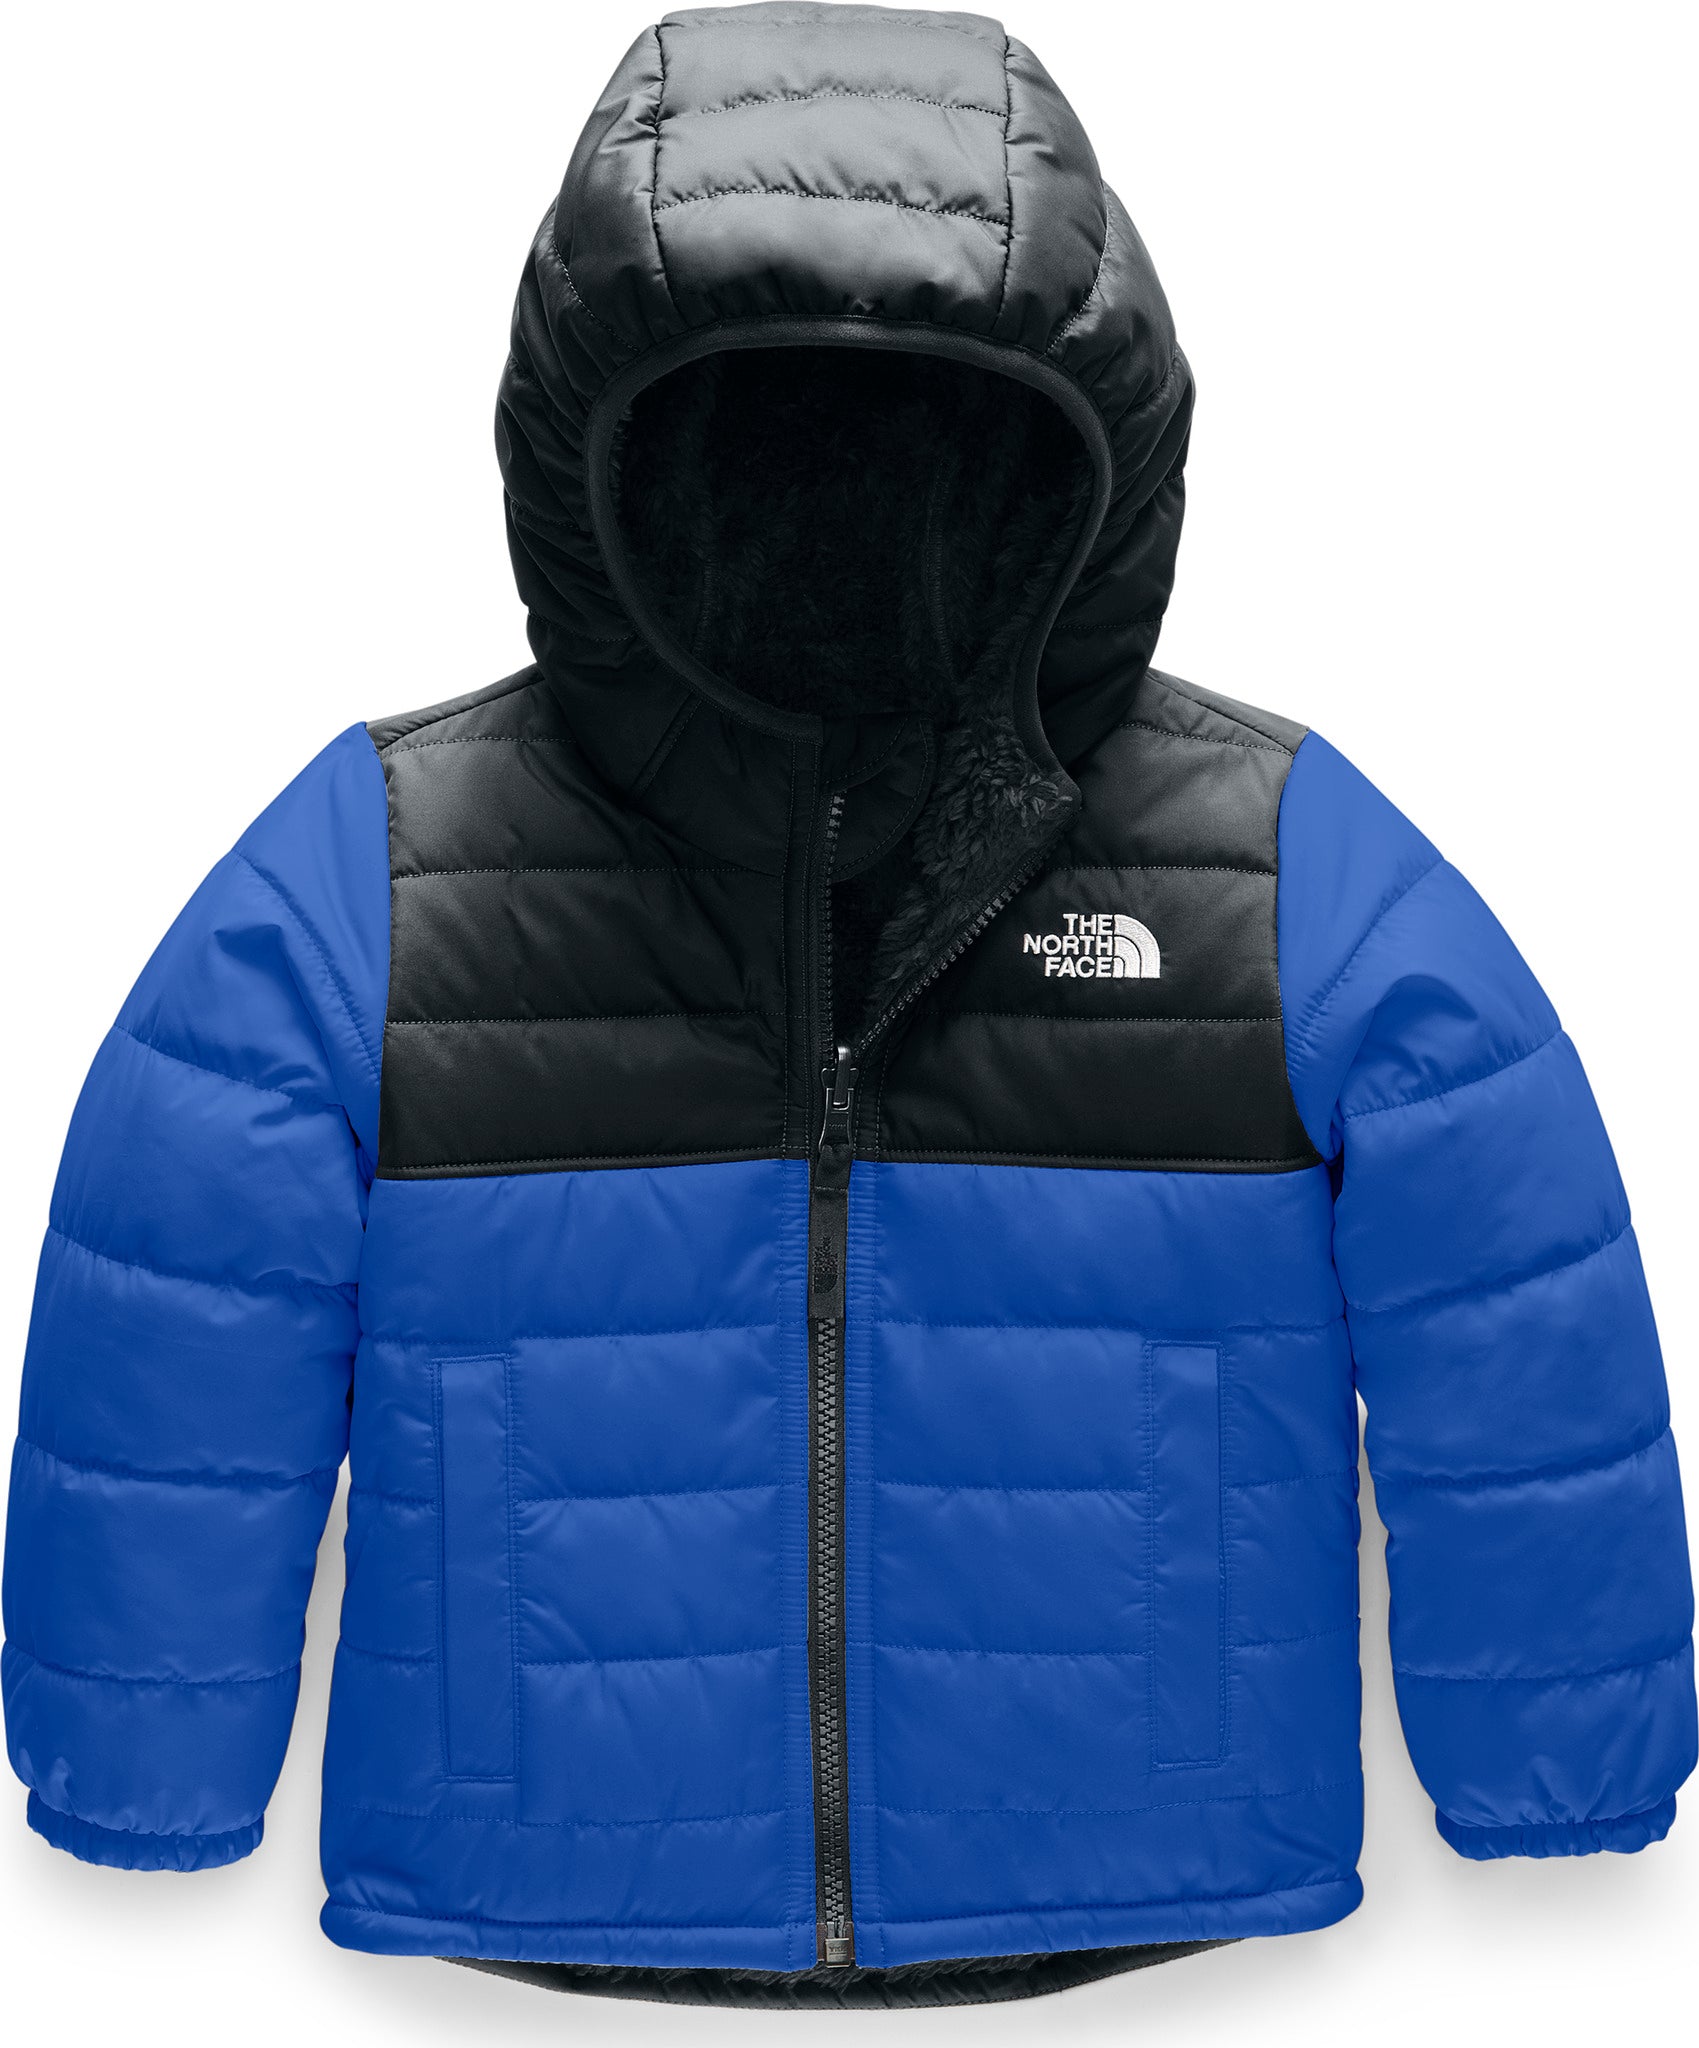 The North Face Reversible Mount 